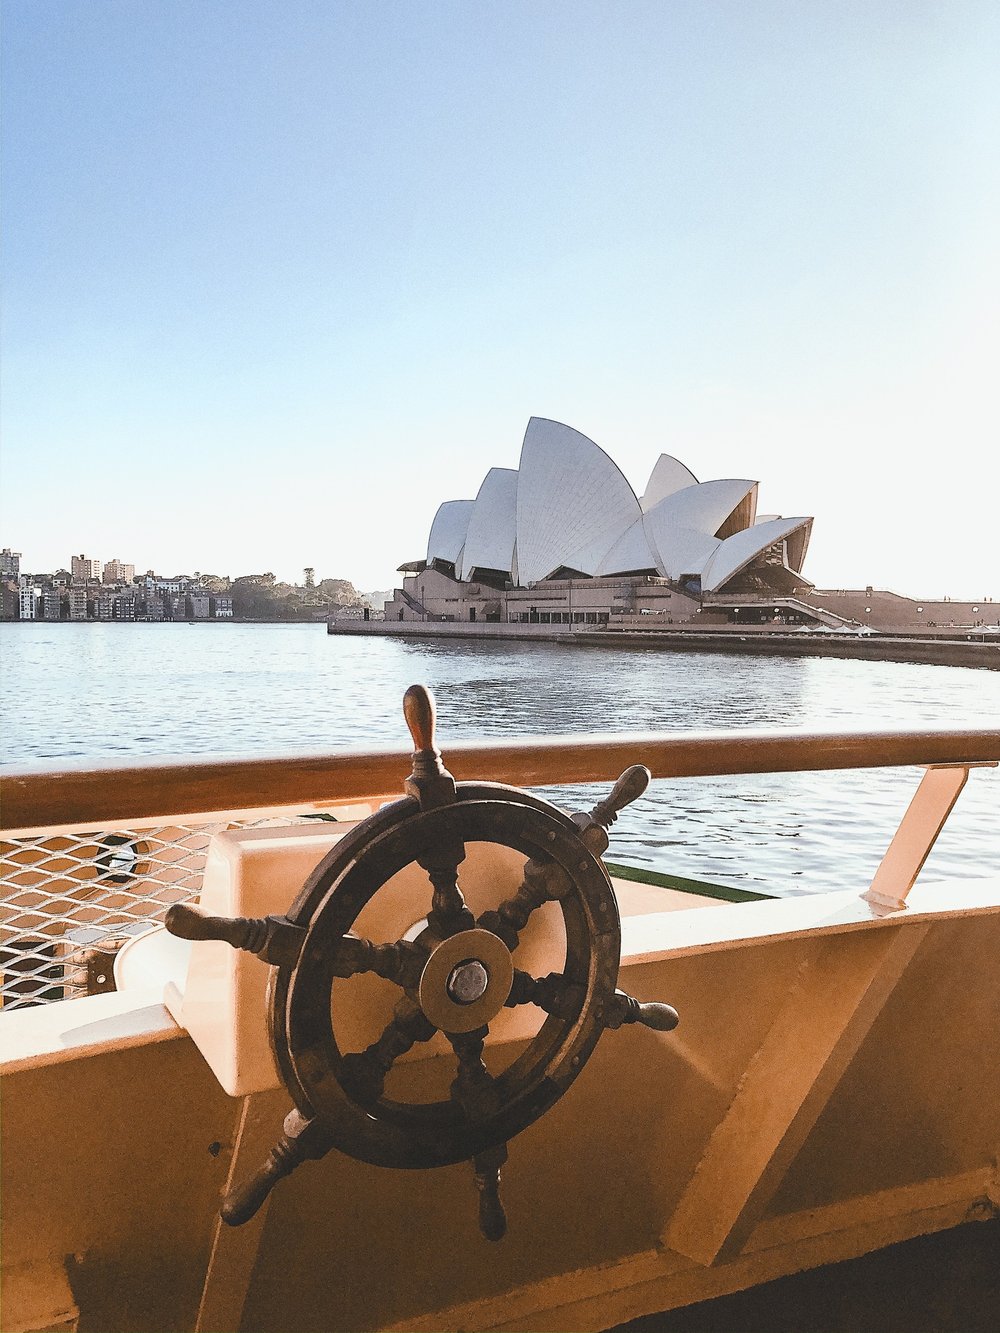 Ferry Ride from Circular Quay and the Opera House - Sydney - New South Wales (NSW) - Australia